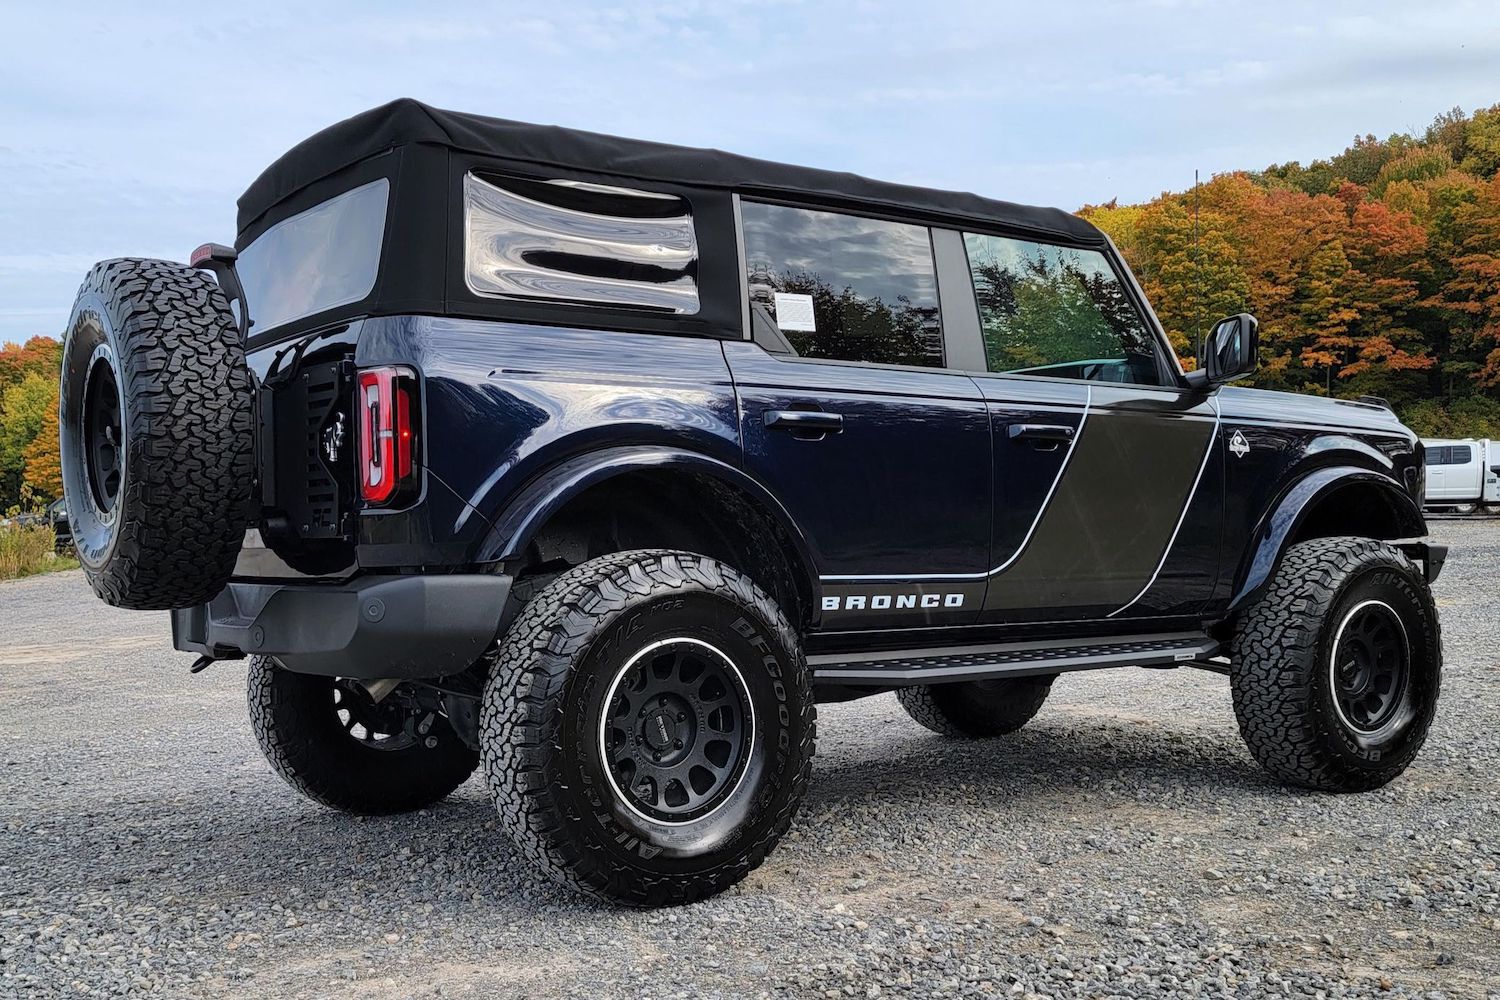 https://fordauthority.com/wp-content/uploads/2022/10/Modified-2021-Ford-Bronco-Outer-Banks-Exterior-002-Rear-Three-Quarters.jpg